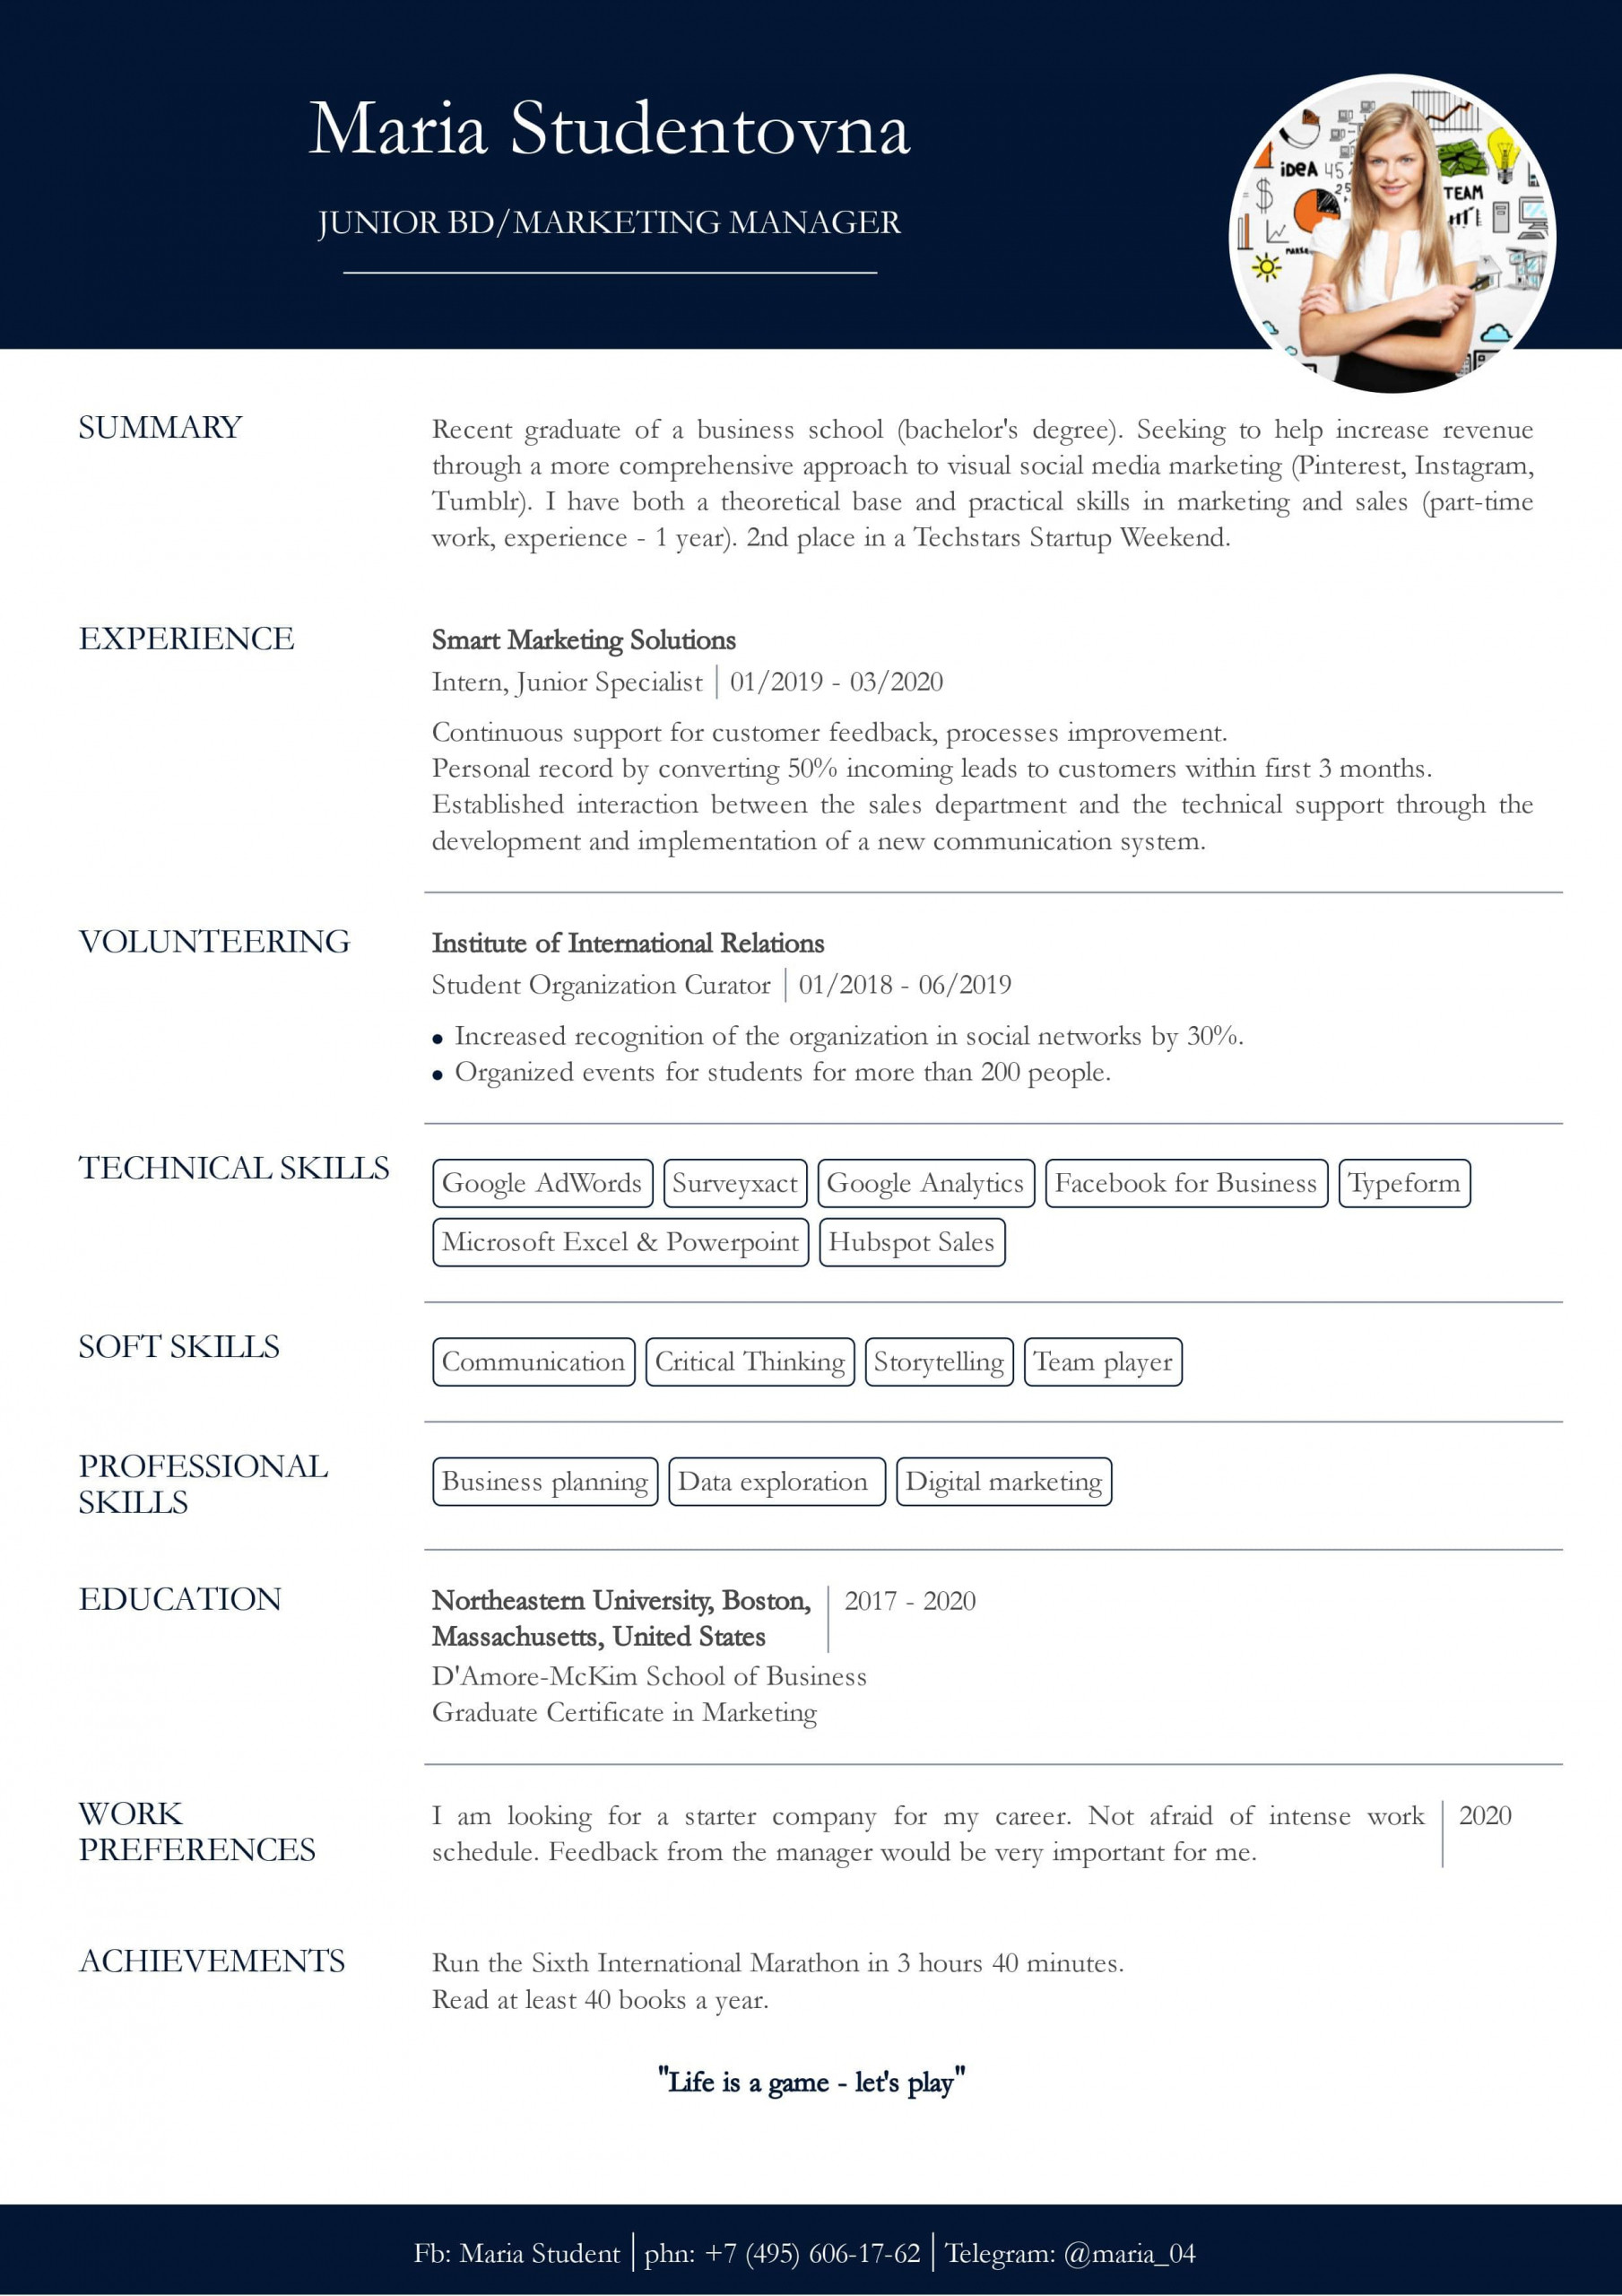 Sample Resume for Freshers with No Work Experience Masters Degree Resume with No Work Experience. Sample for Students. – Cv2you Blog